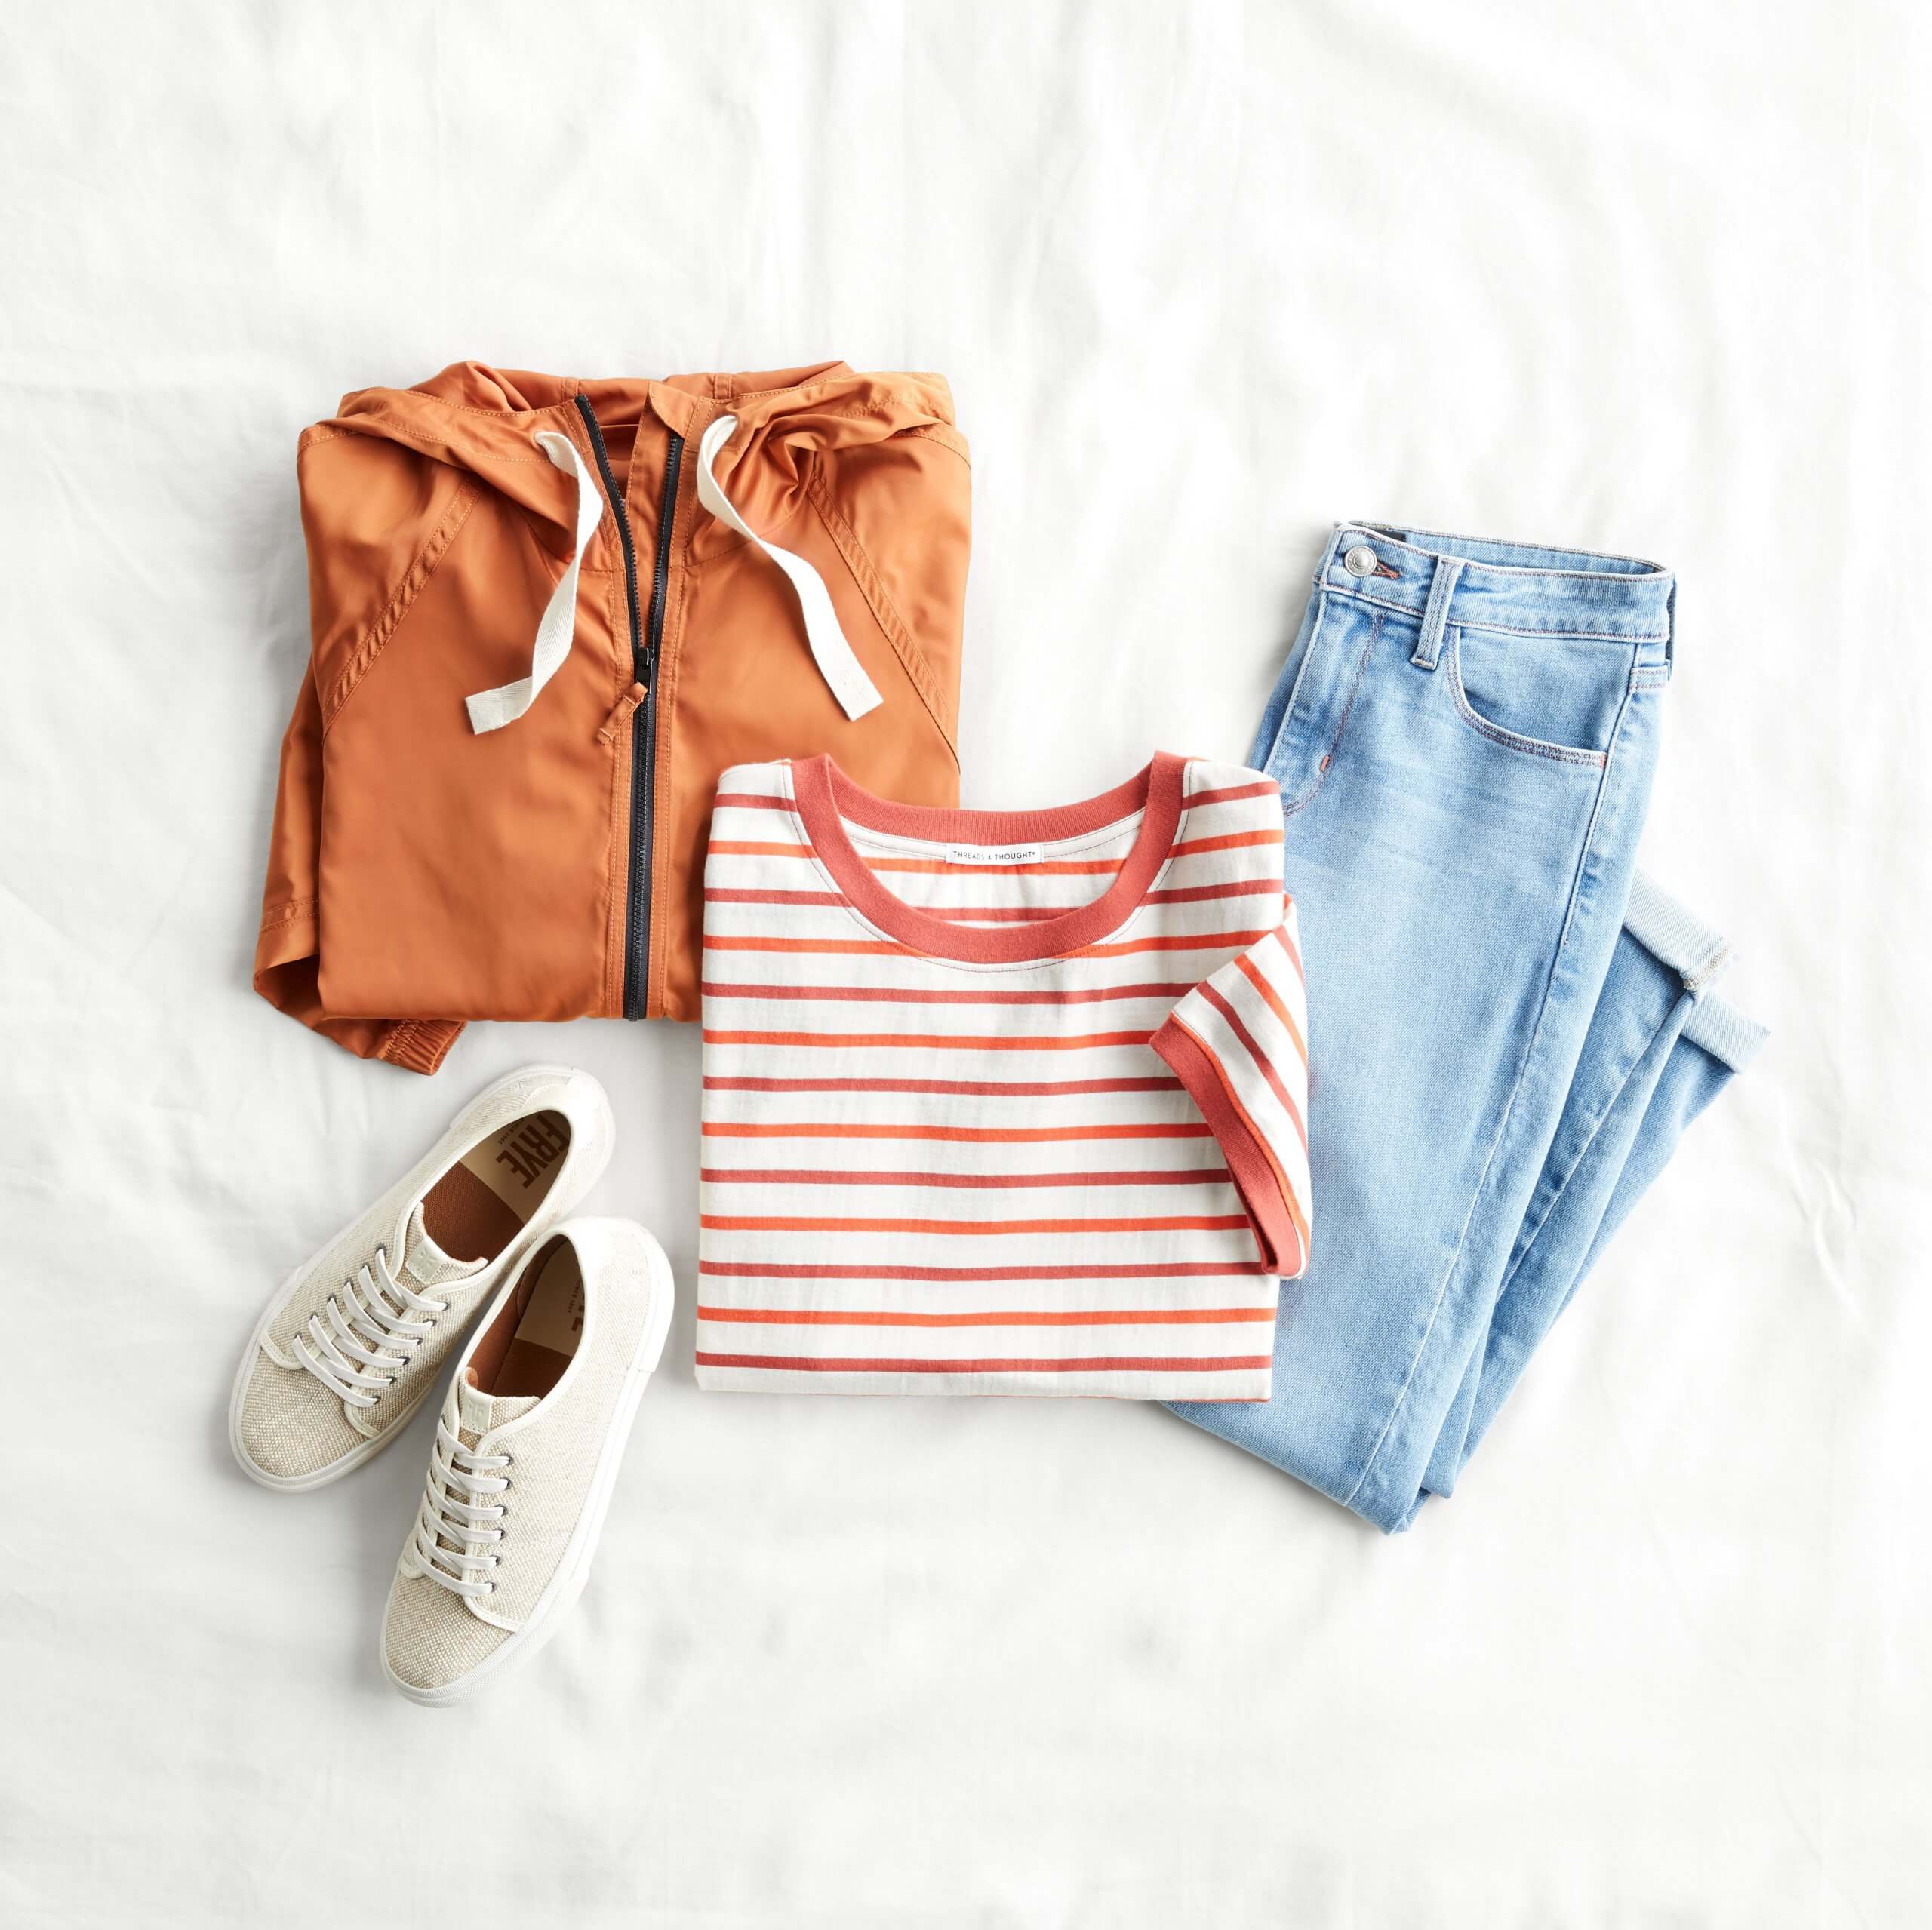 Stitch Fix Women's outfit laydown featuring orange and white striped tee, lightwash jeans, white sneakers and orange rain jacket. 